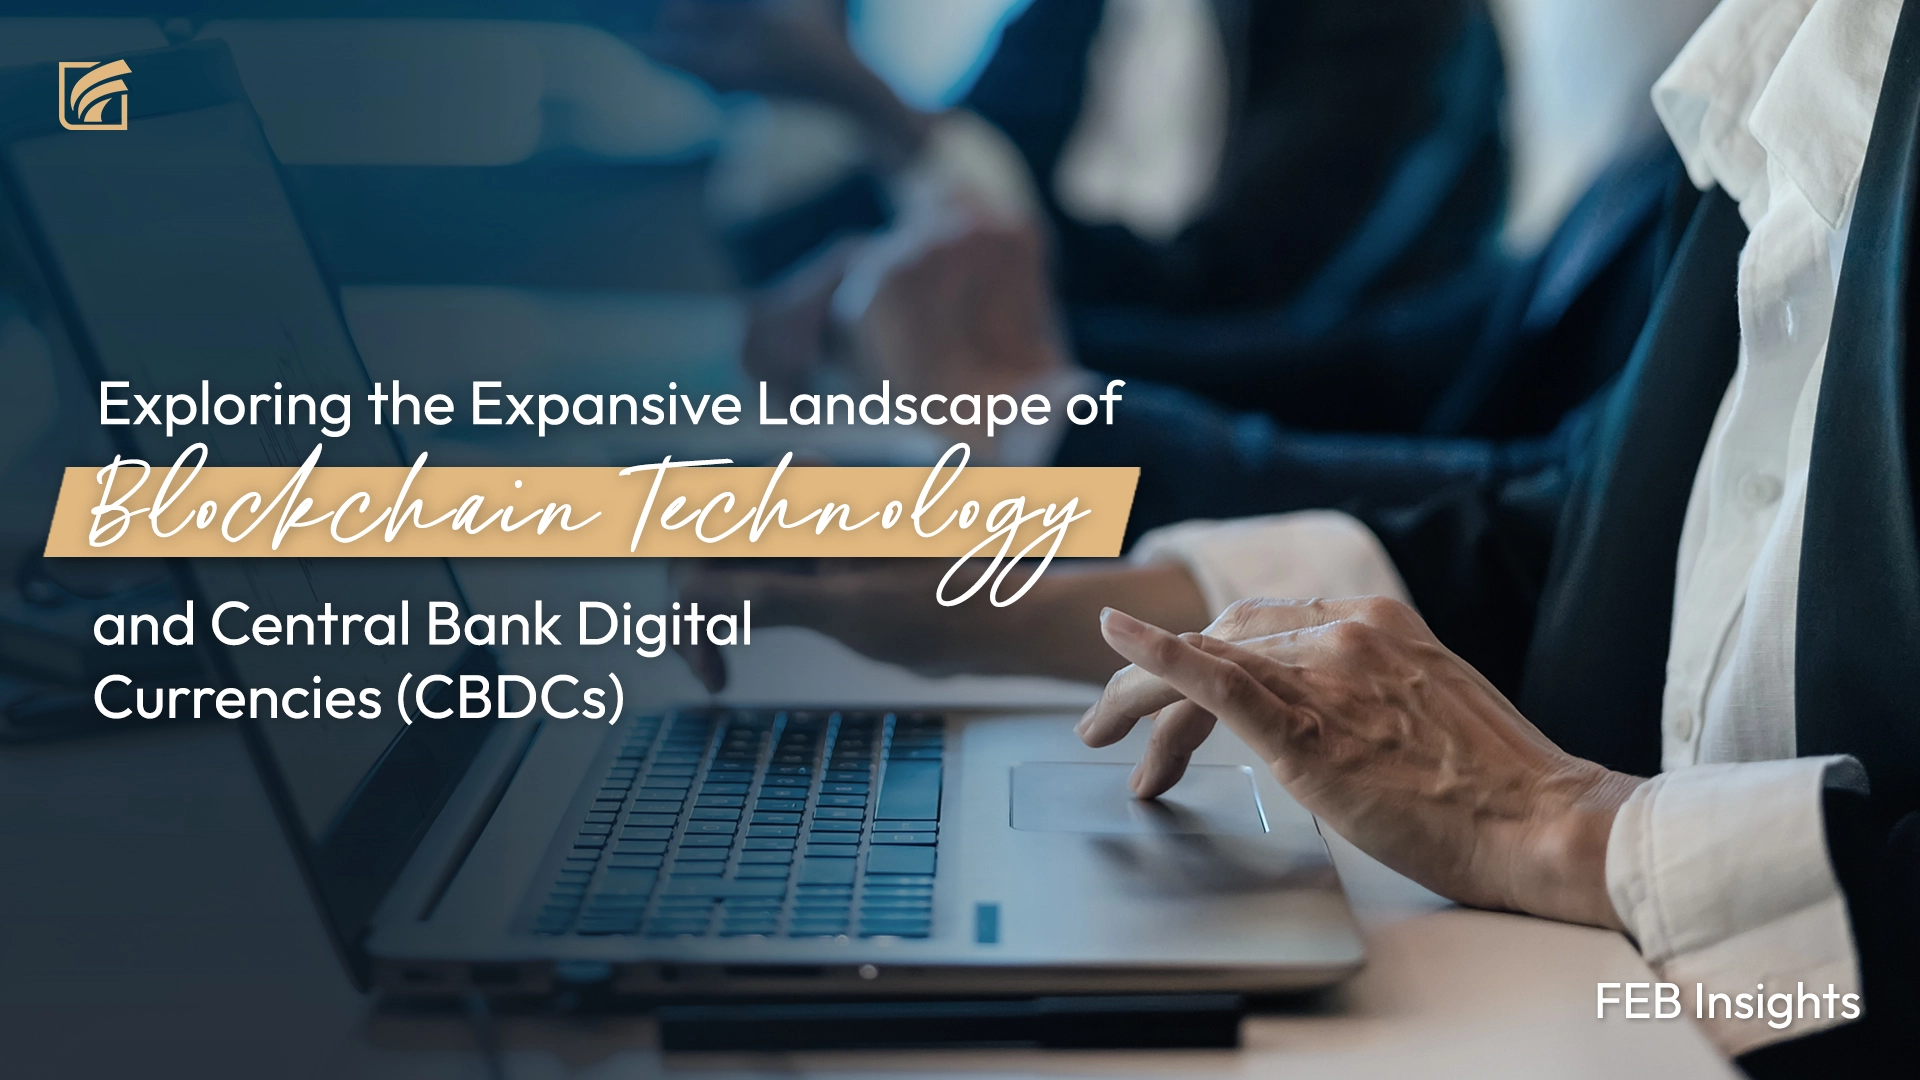 Exploring the Expansive Landscape of Blockchain Technology and Central Bank Digital Currencies (CBDCs)